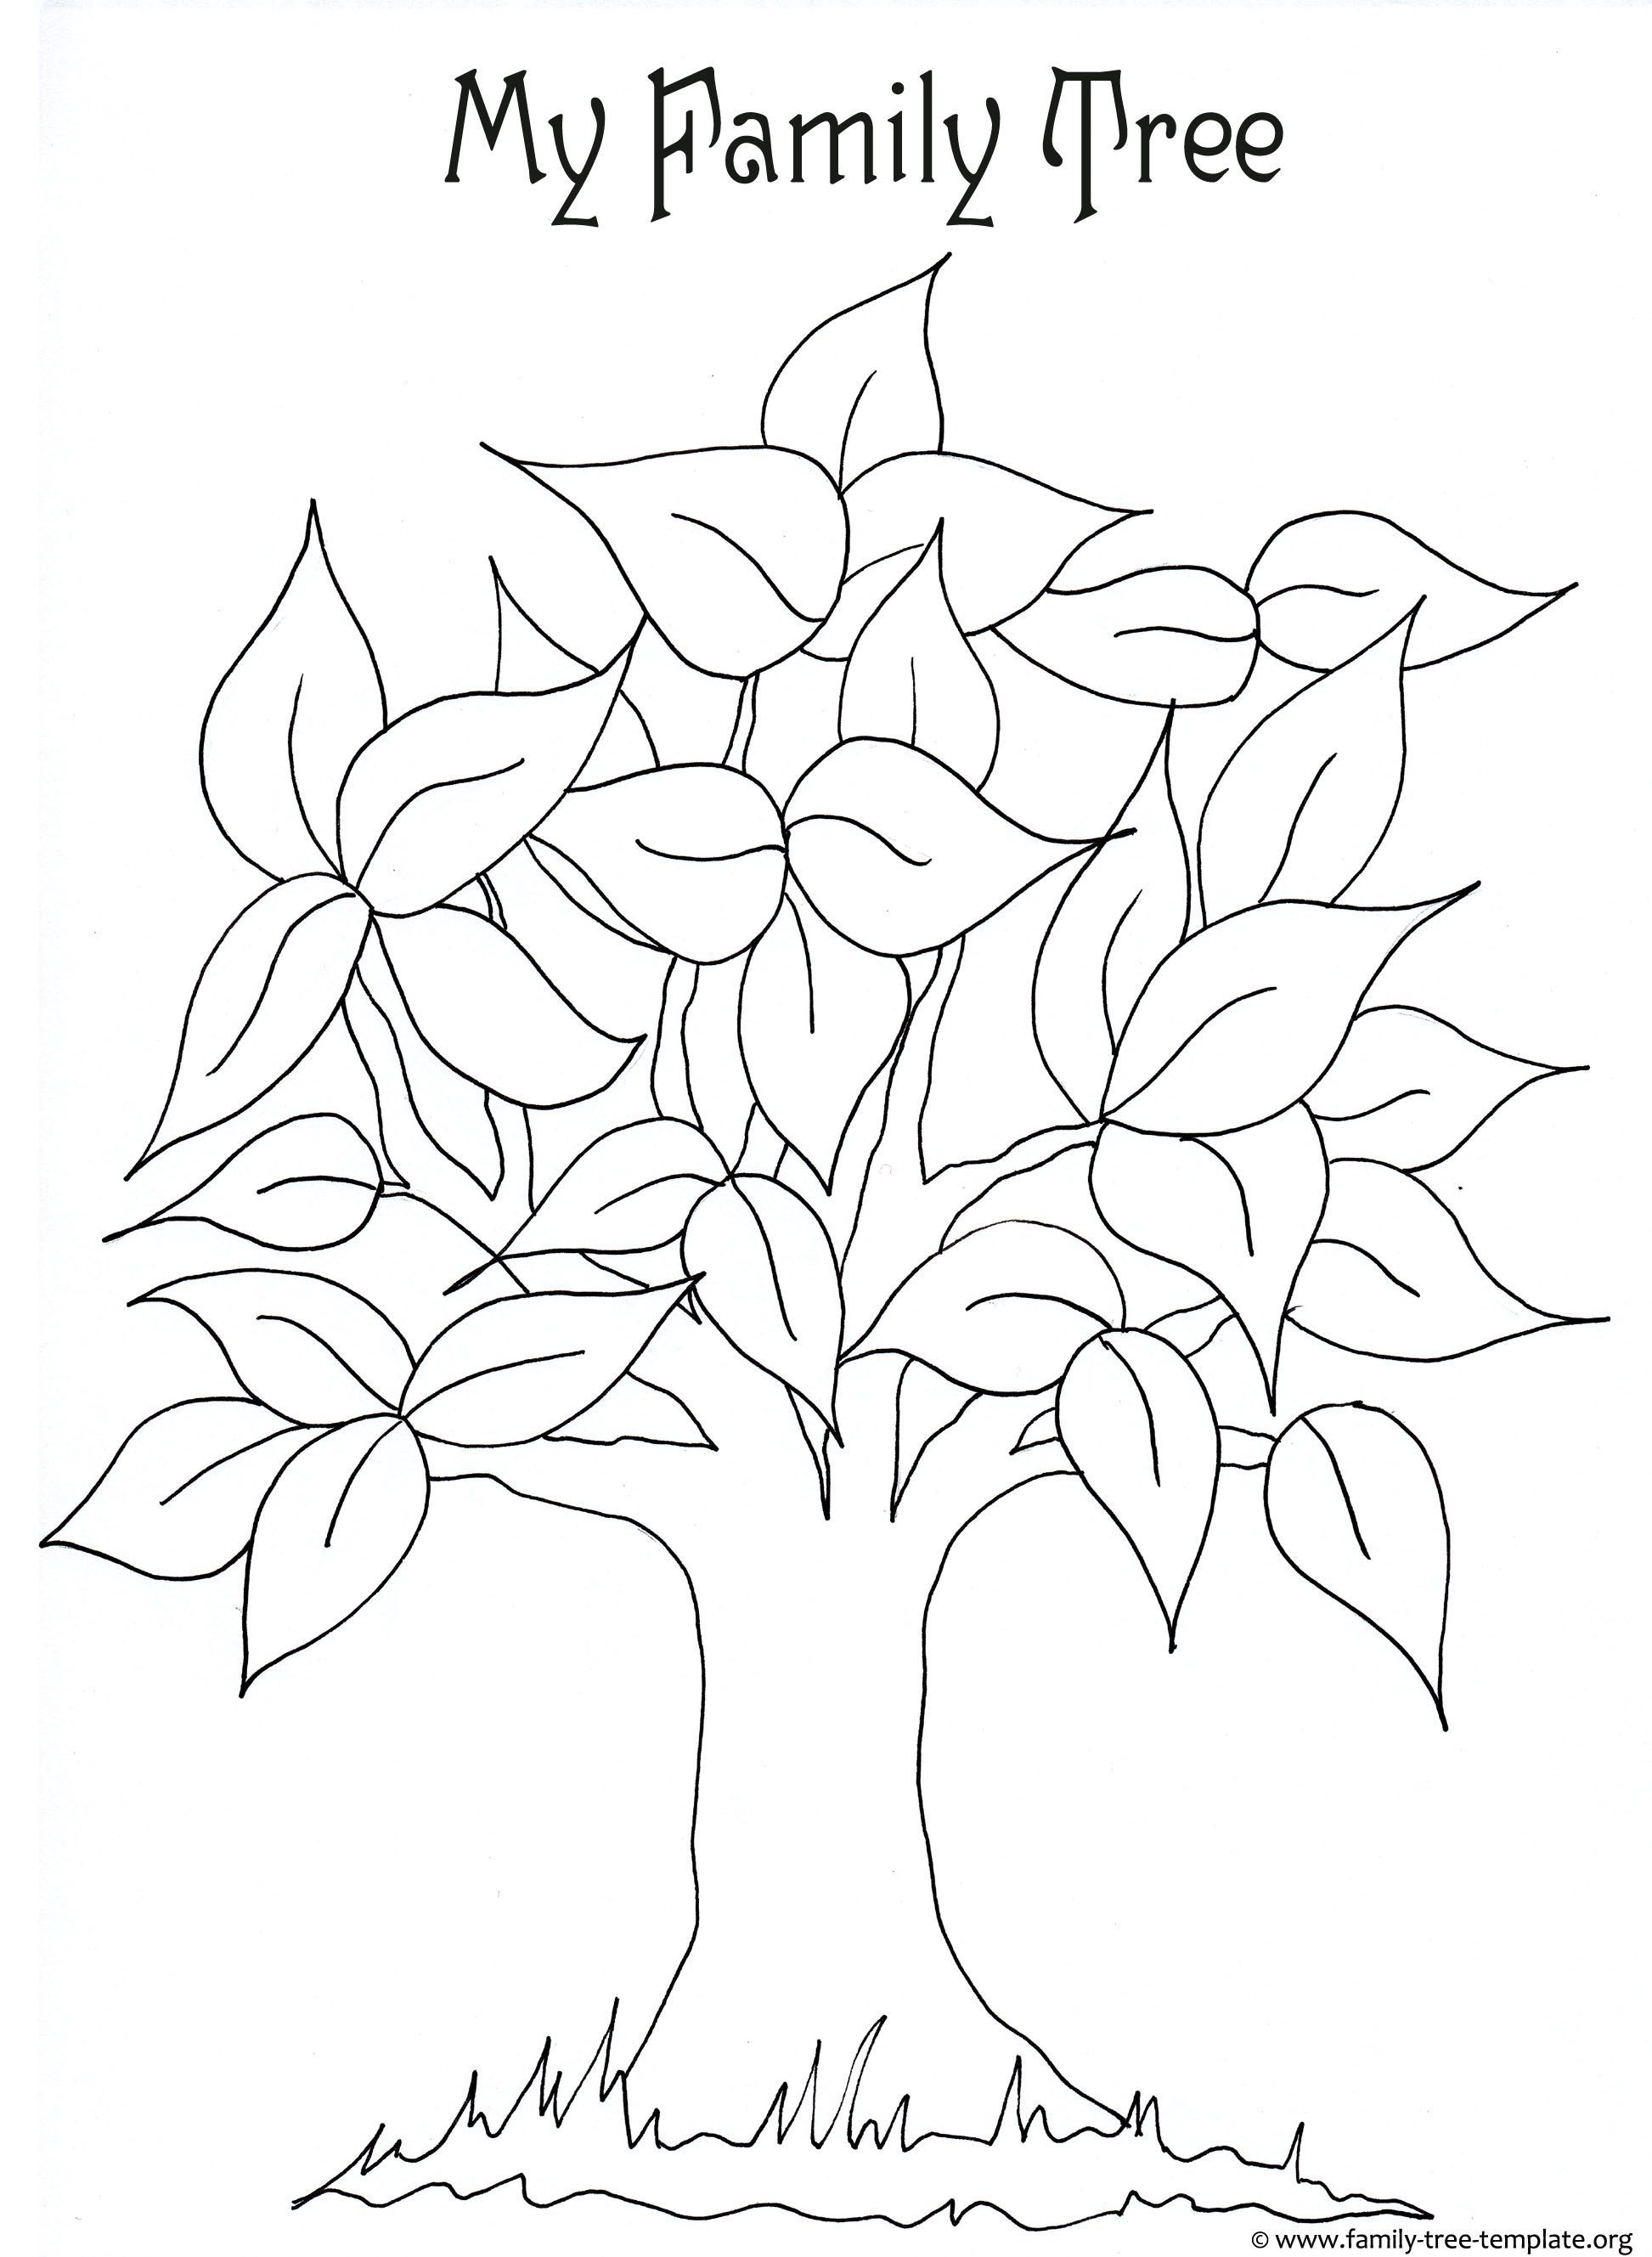 free-printable-family-tree-coloring-pages